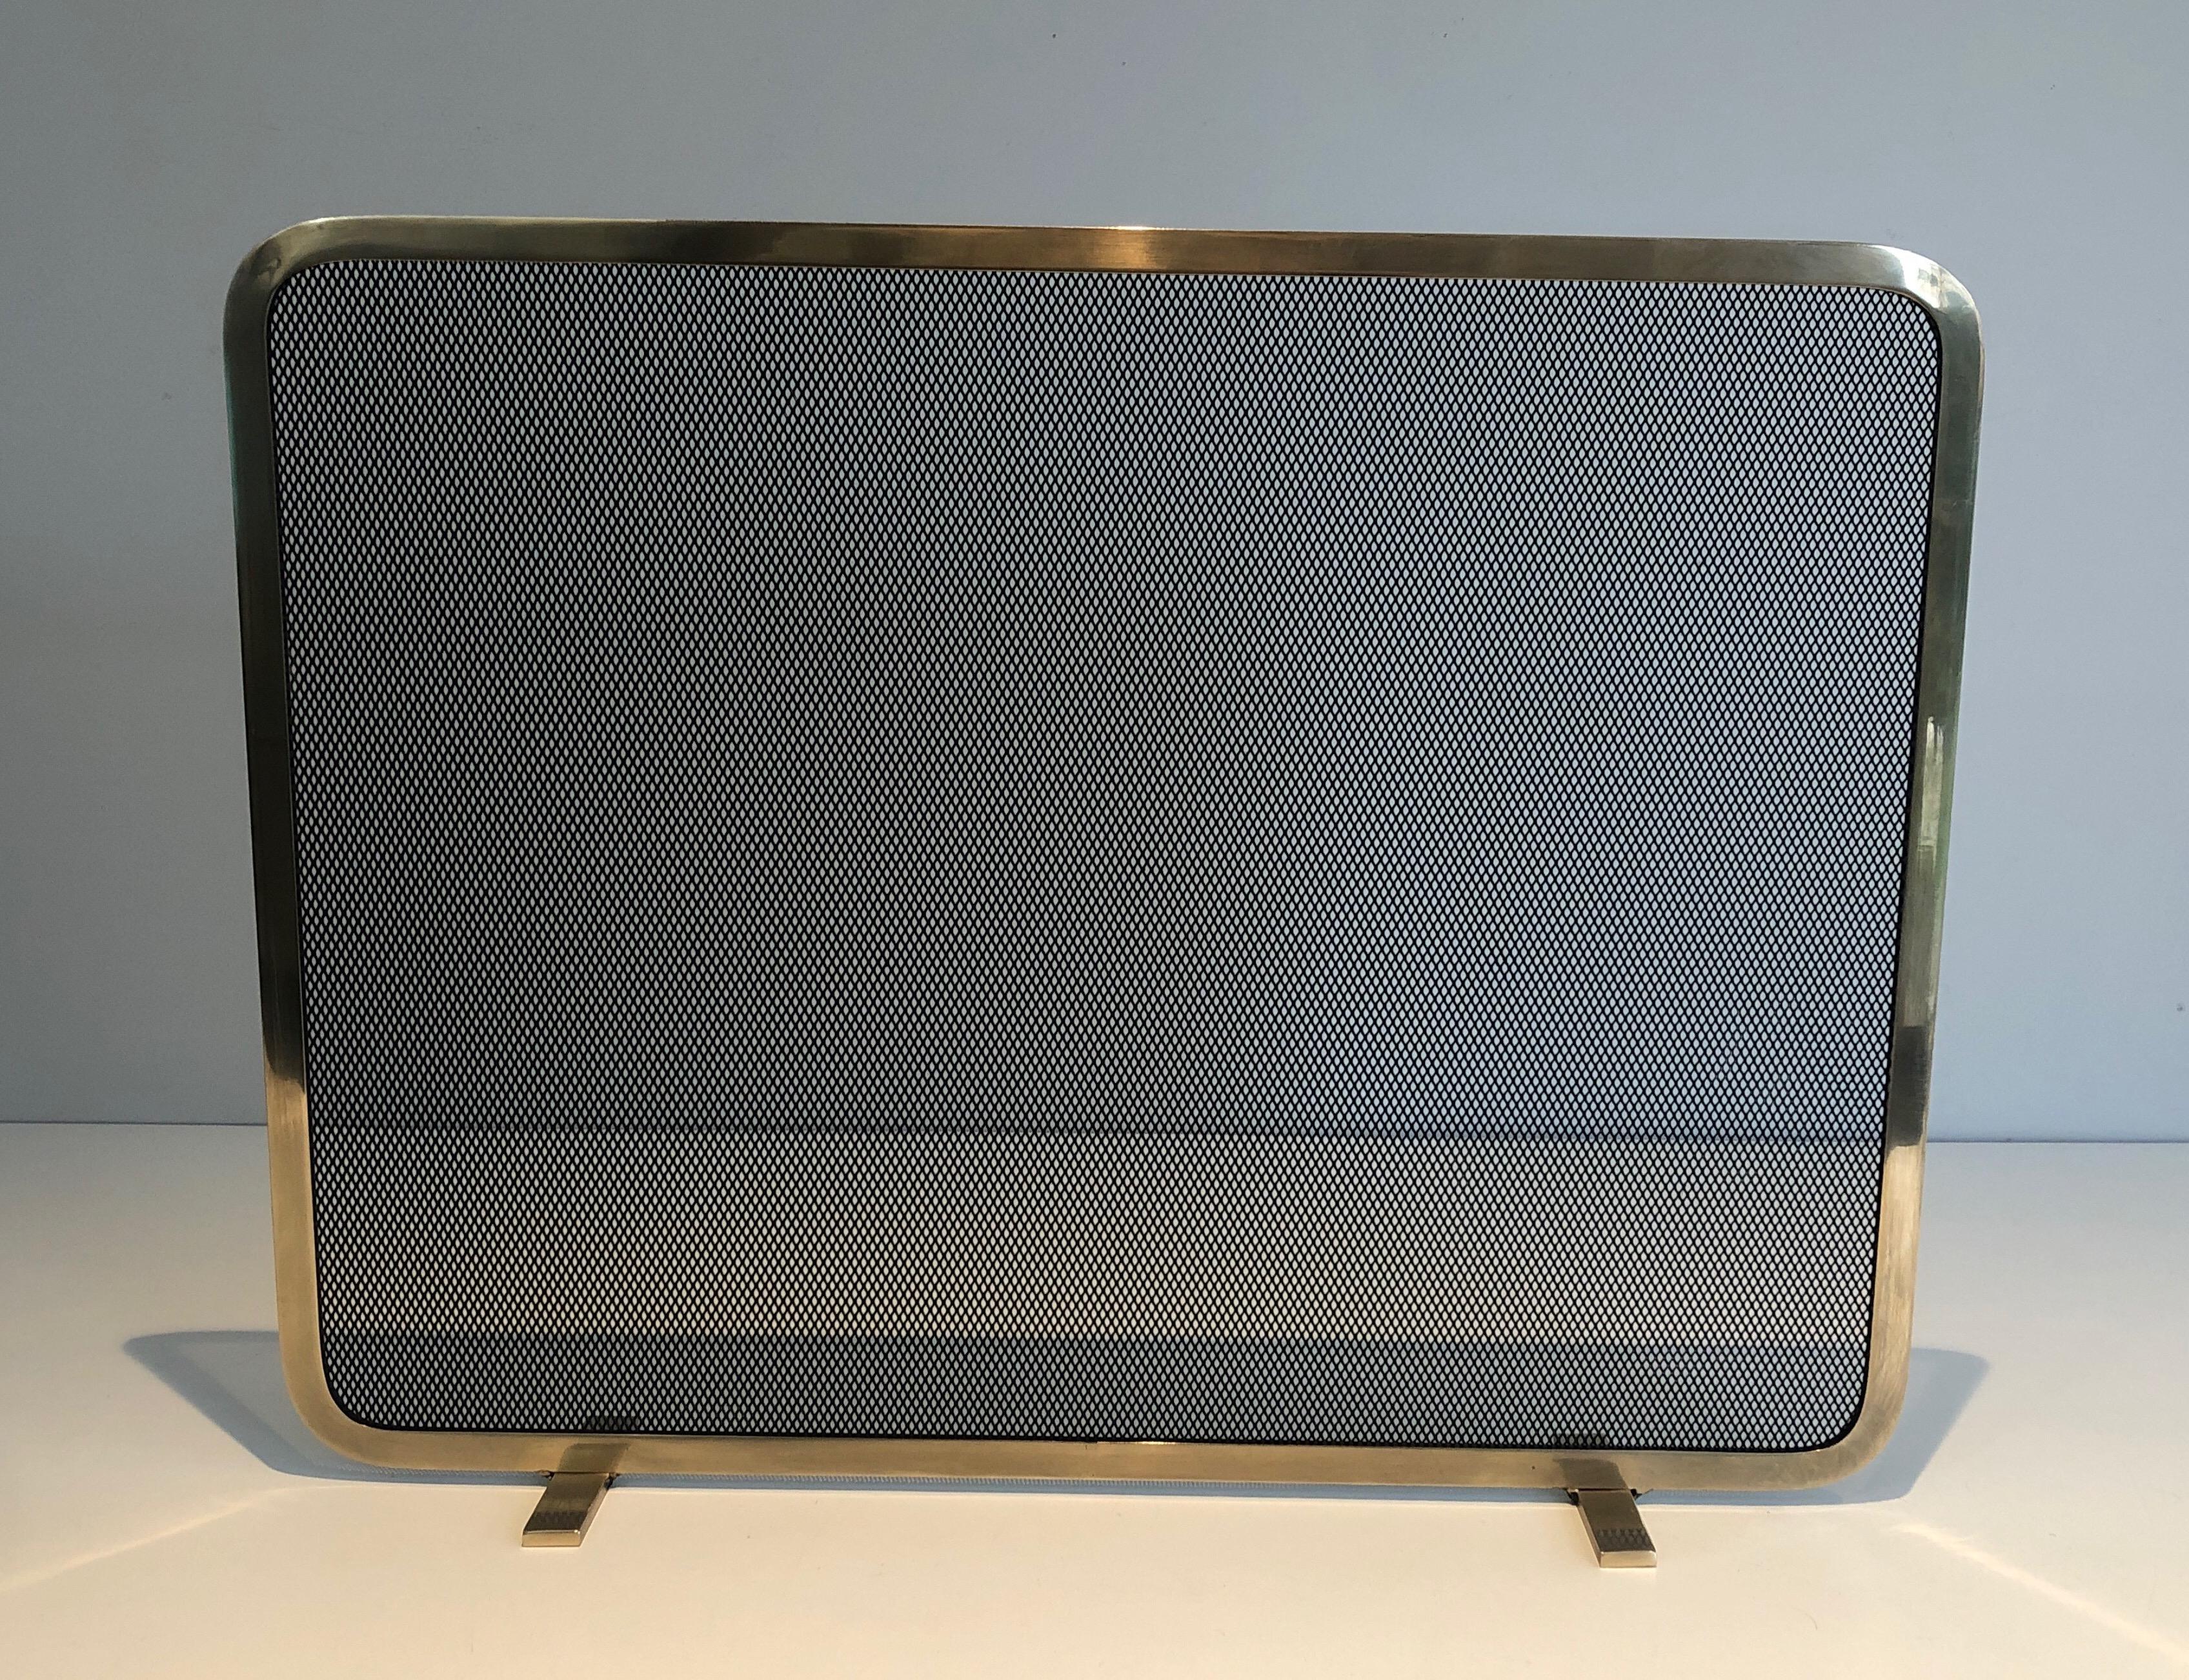 This fireplace screen si made of brass and grilling. This is a very simple model, very elegant, a French work. Circa 1970.